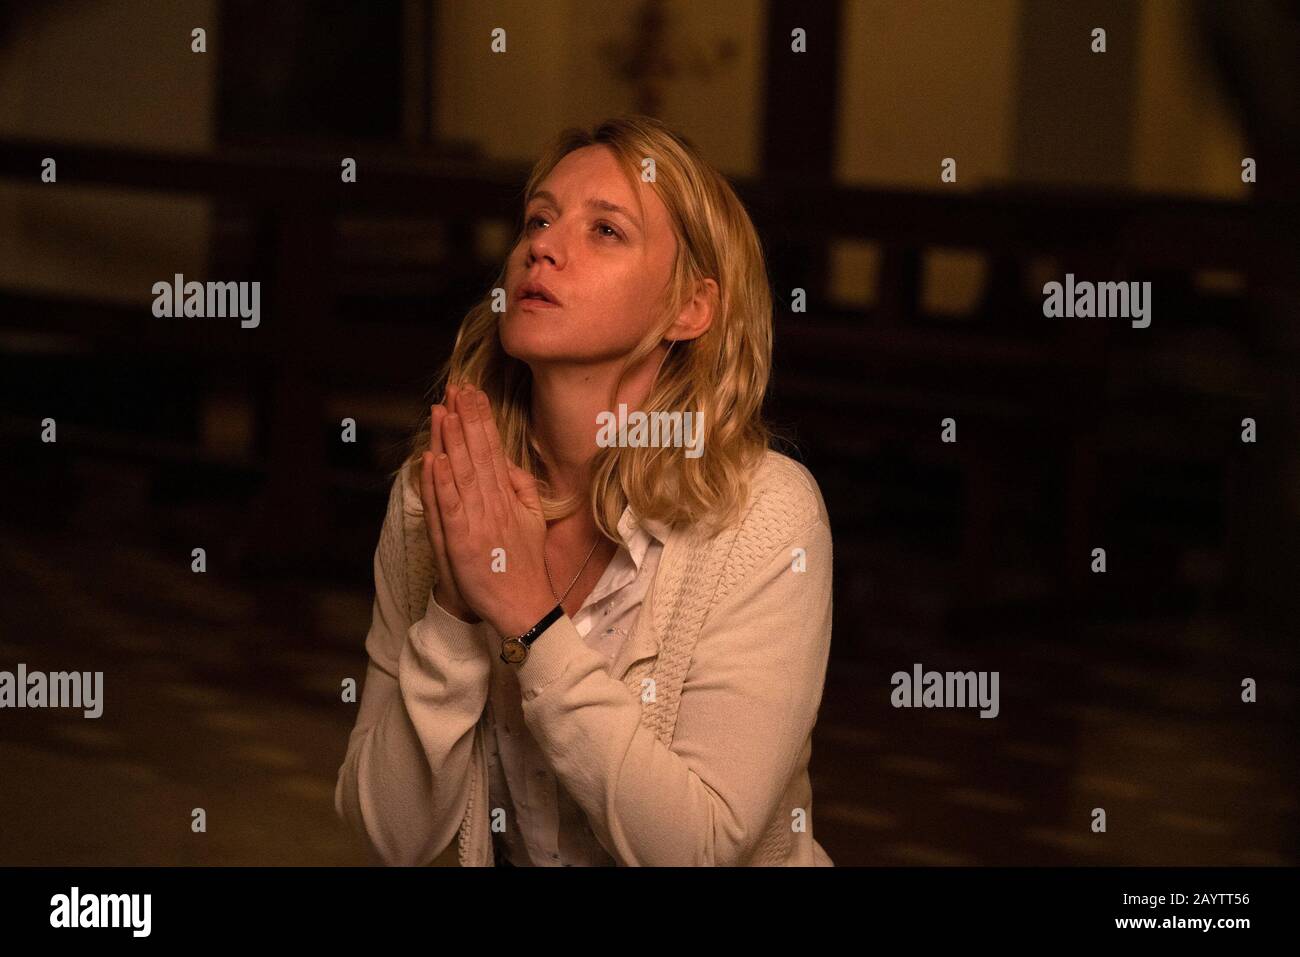 LUDIVINE SAGNIER in THE NEW POPE (2020), directed by PAOLO SORRENTINO. Credit: WILDSIDE / Album Stock Photo